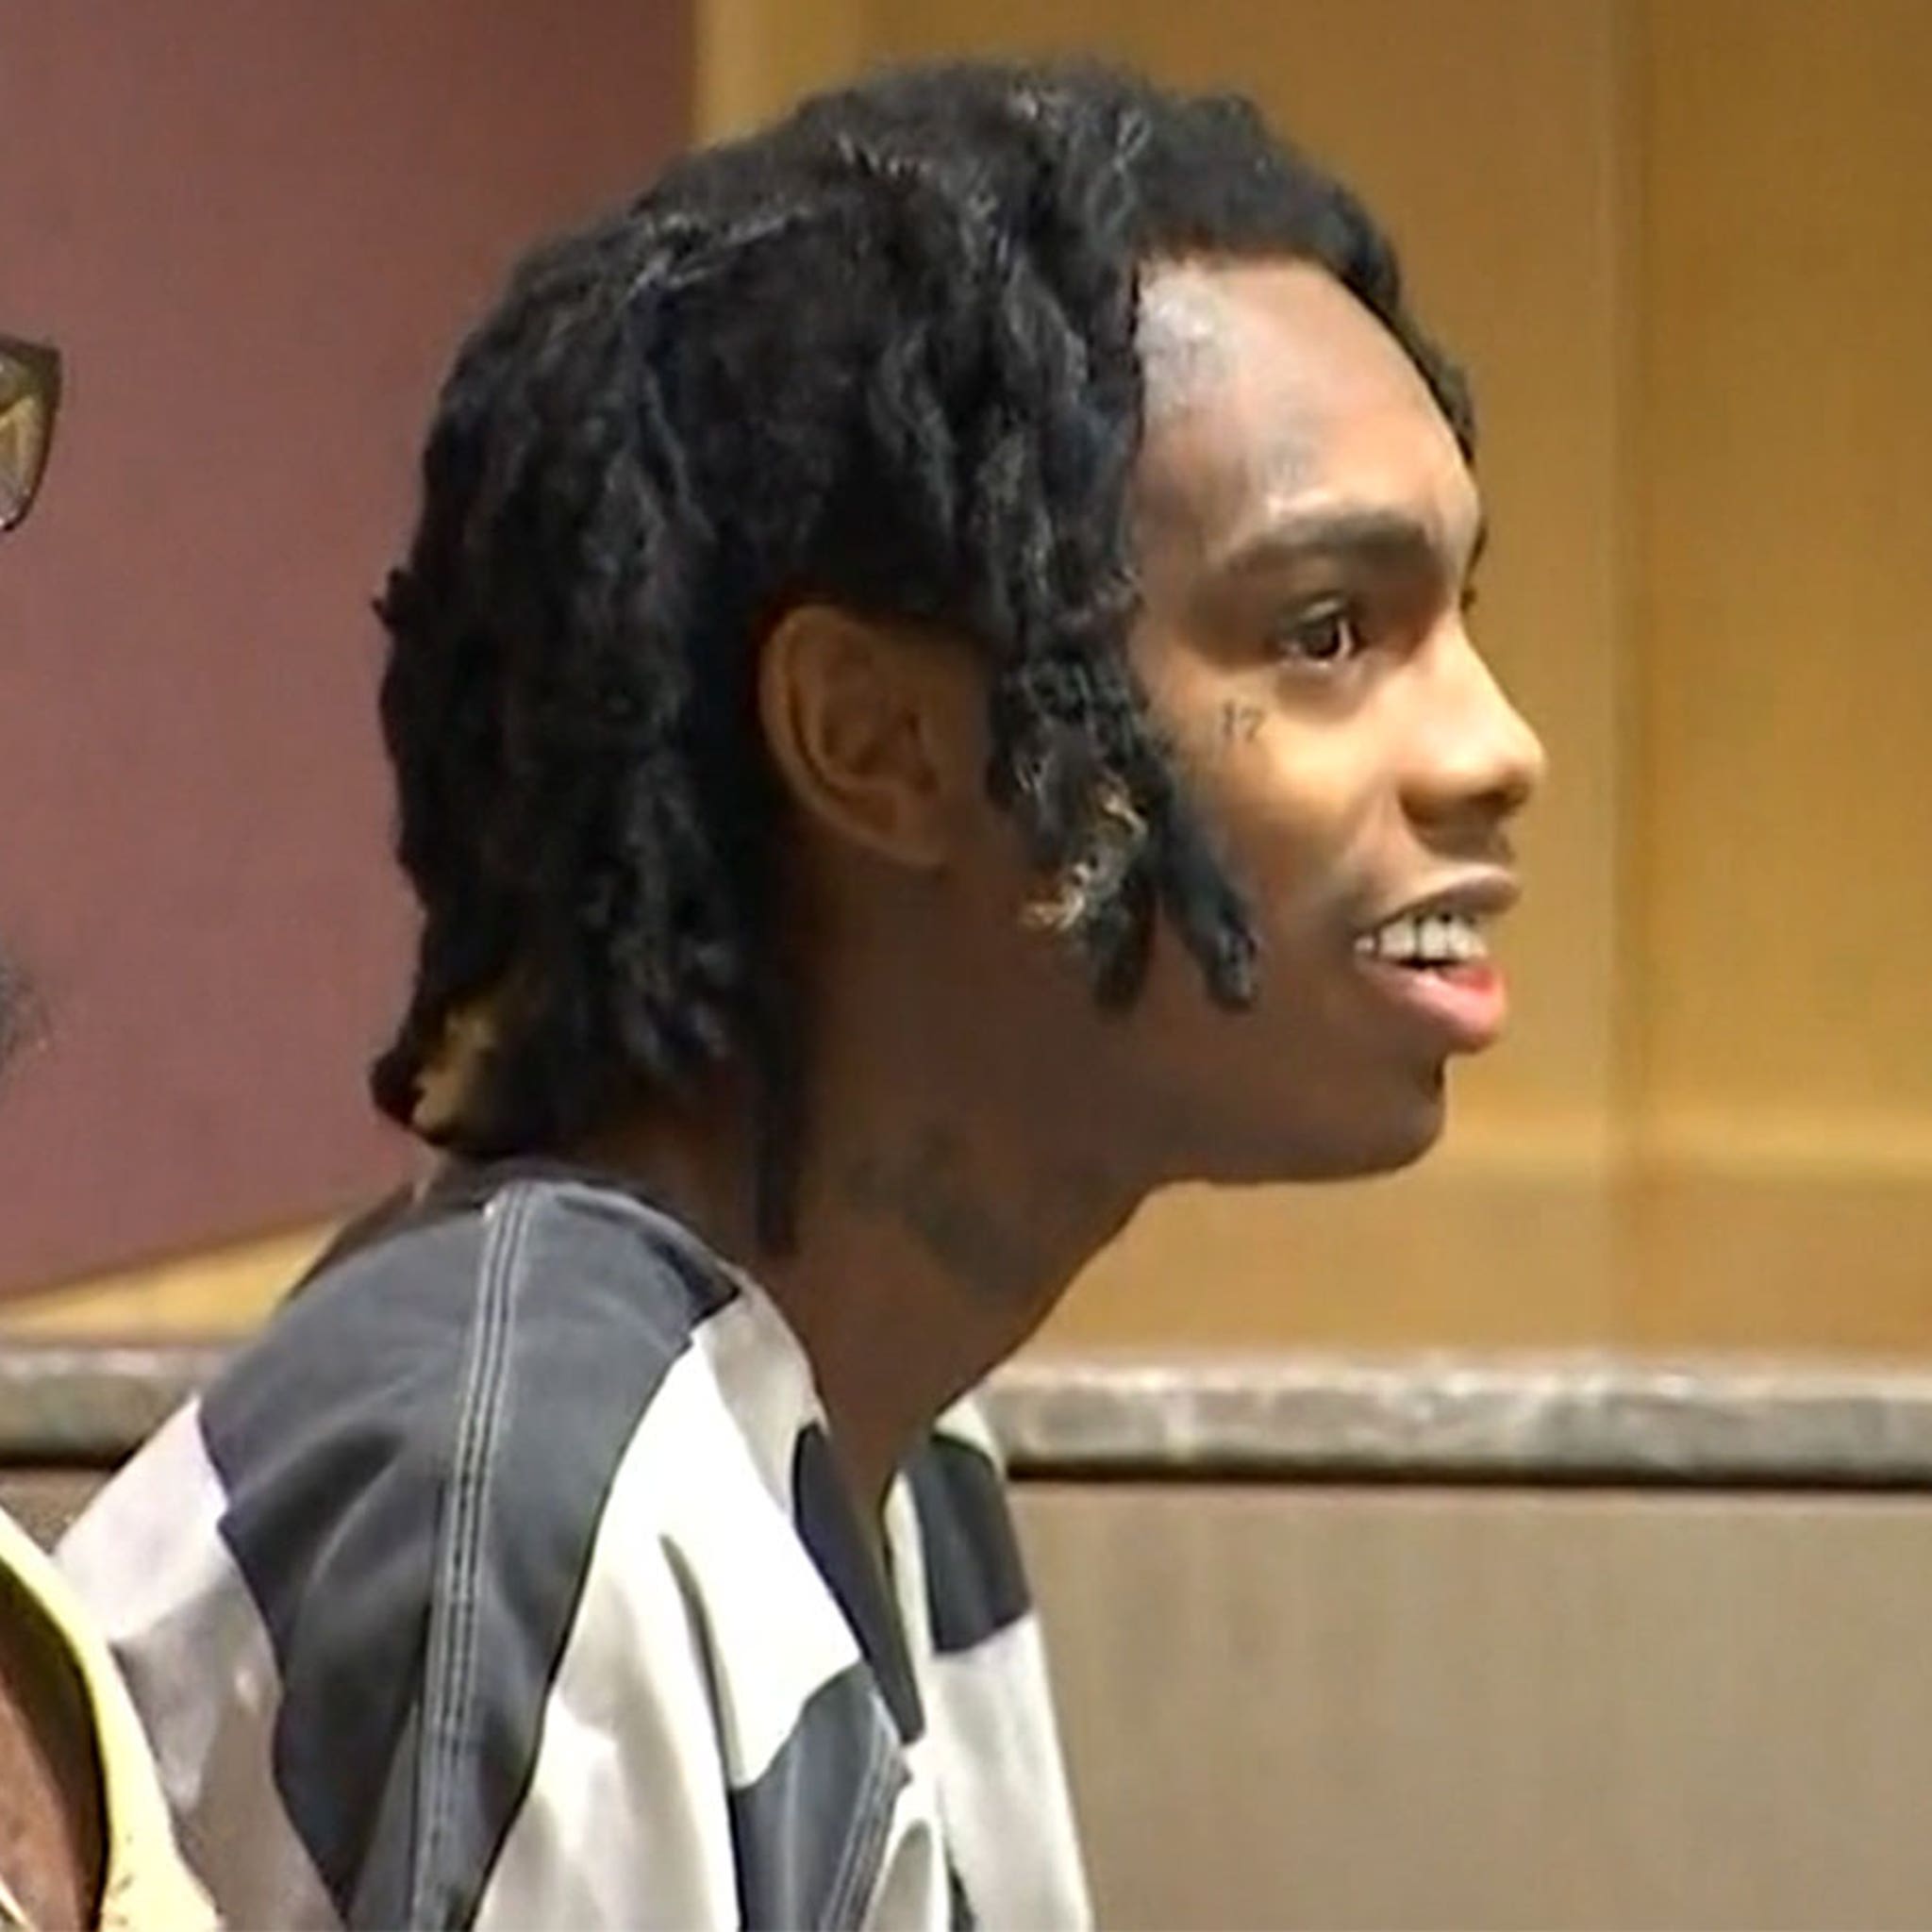 Ynw Melly Smiling In Court During Murder Case Hearing